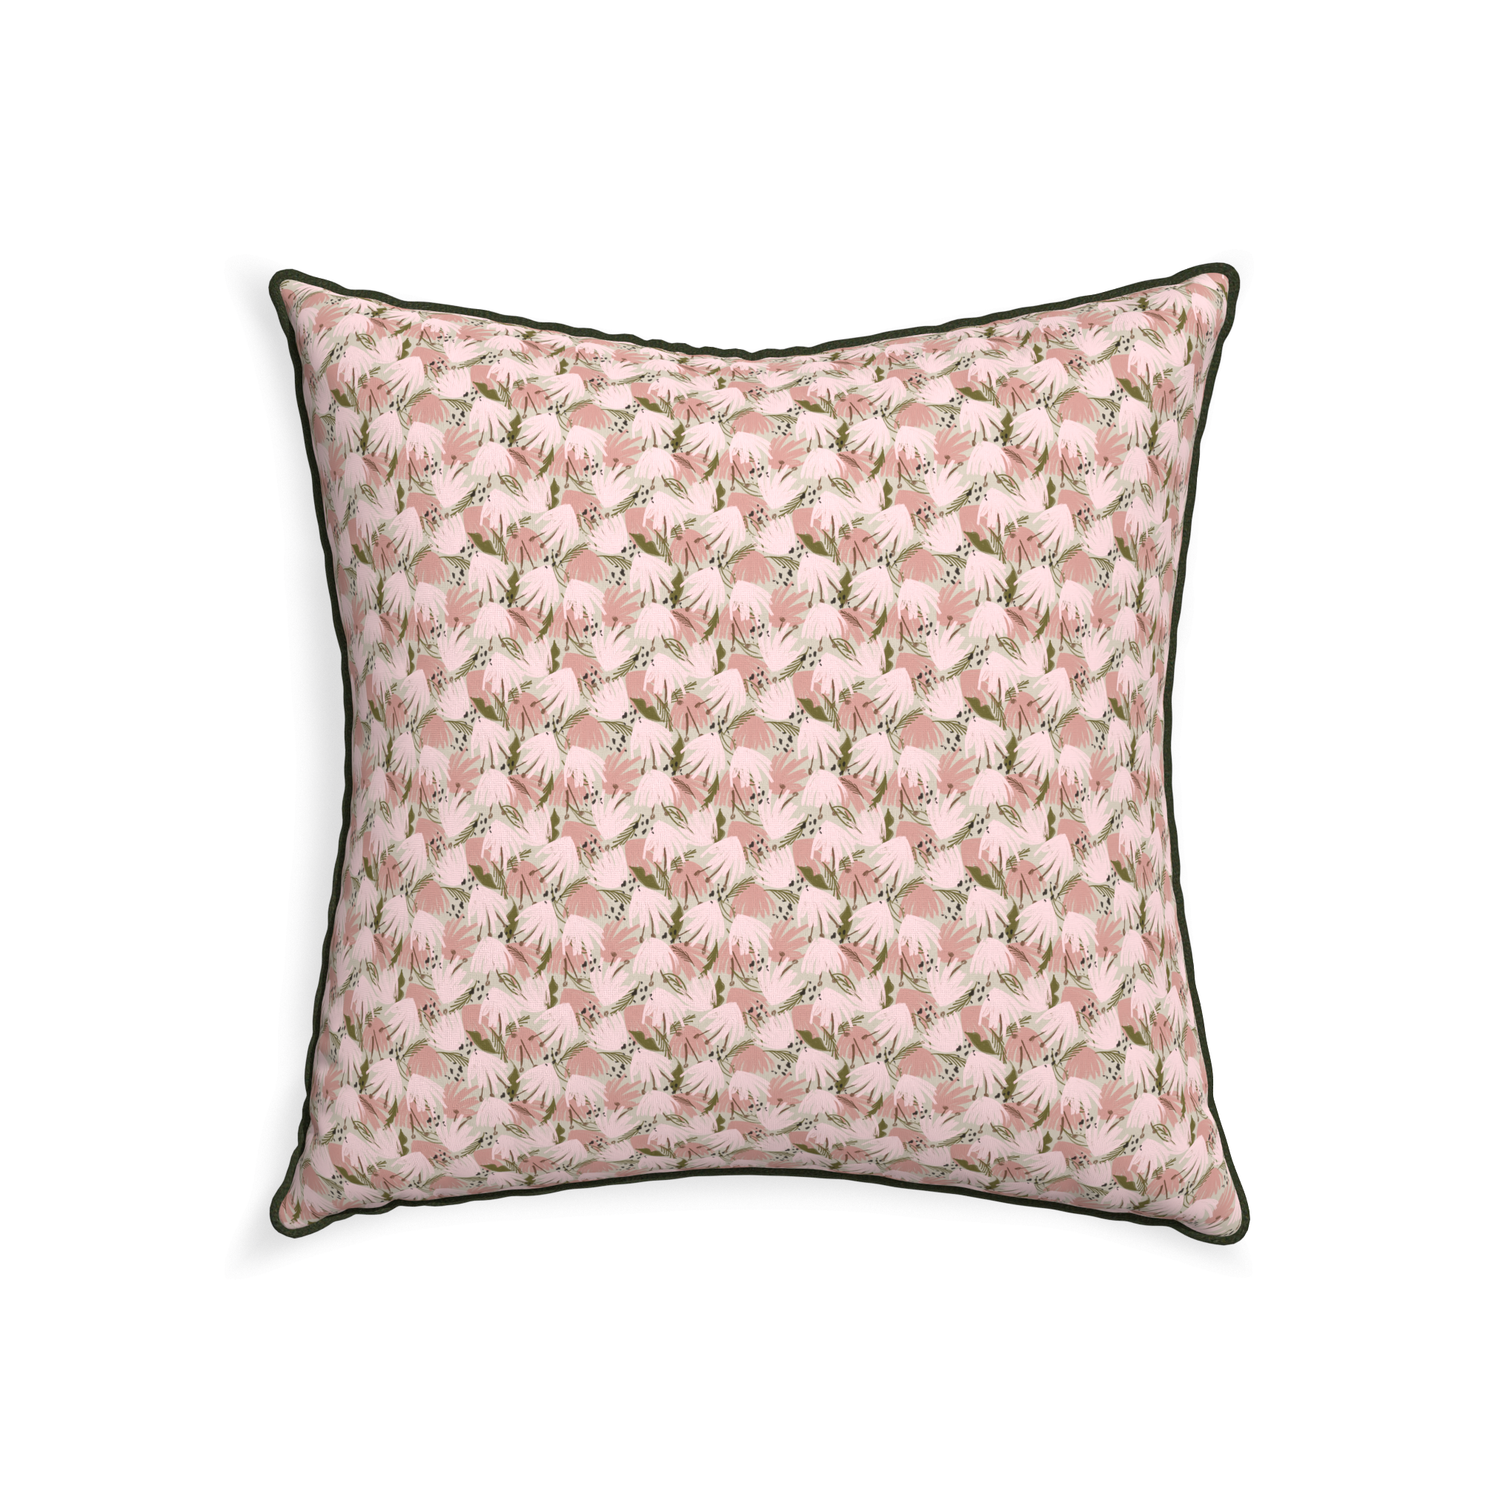 22-square eden pink custom pink floralpillow with f piping on white background